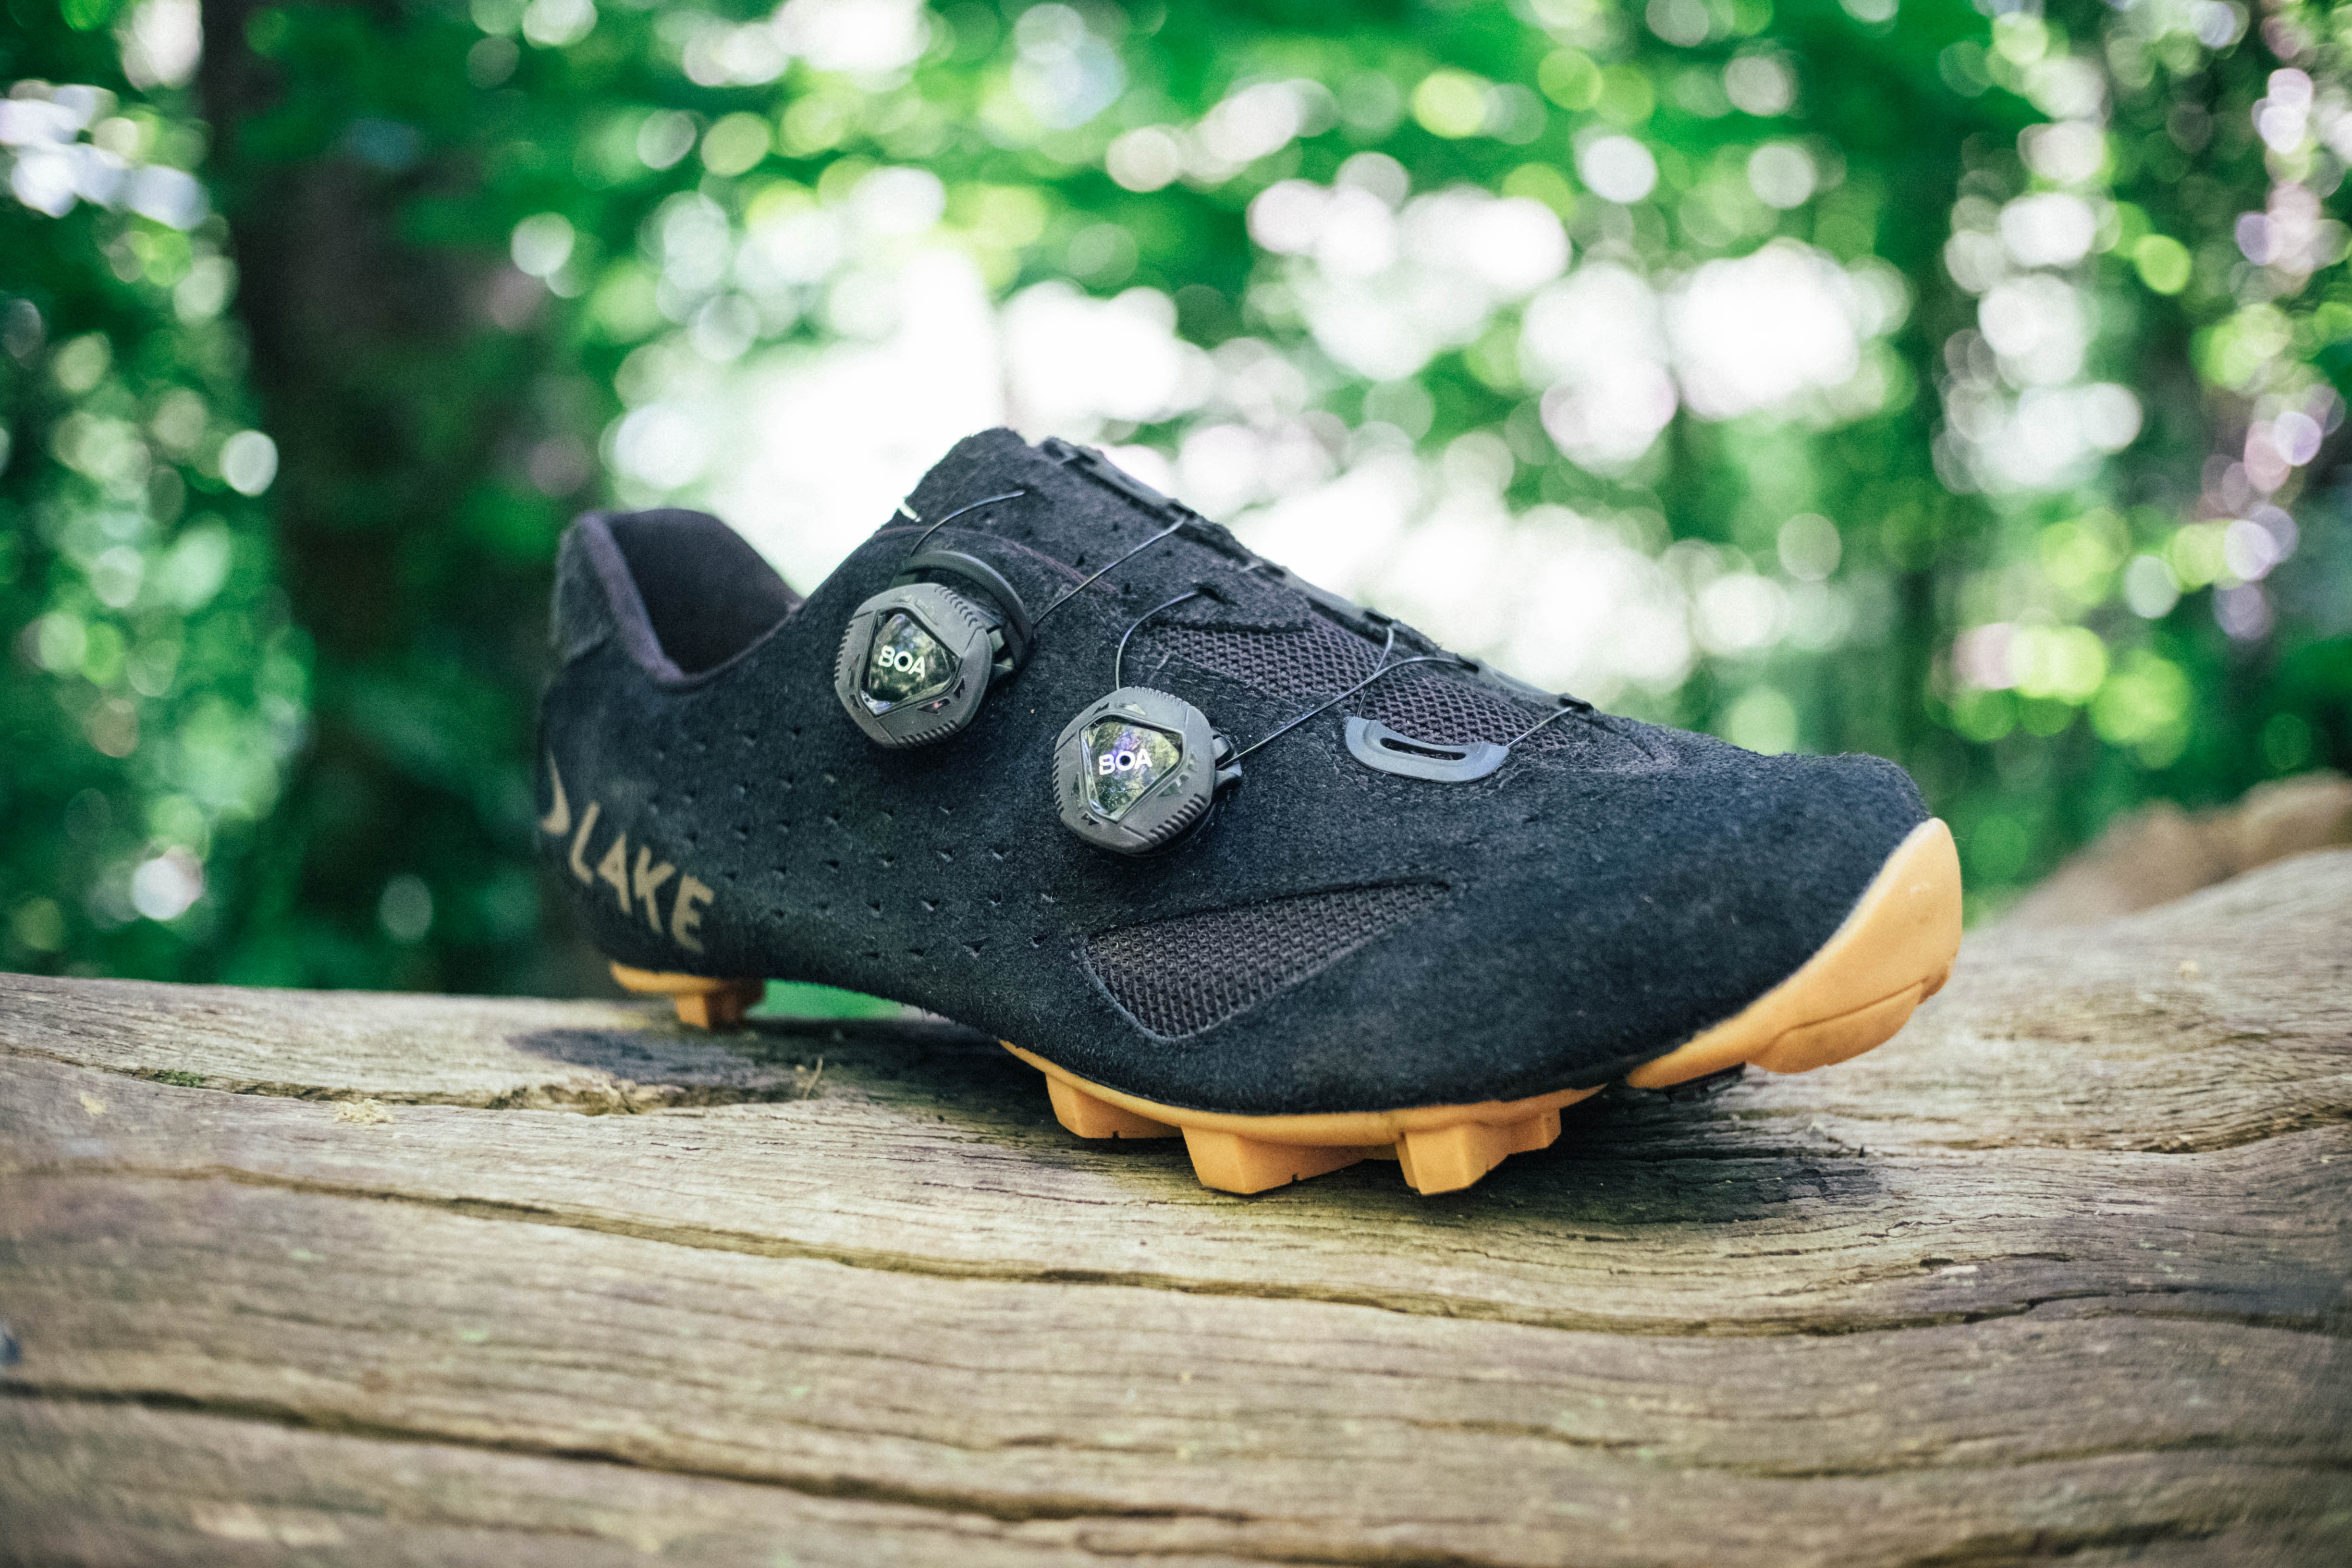 Best gravel shoes 2023 - The best options for whatever gravel means to ...